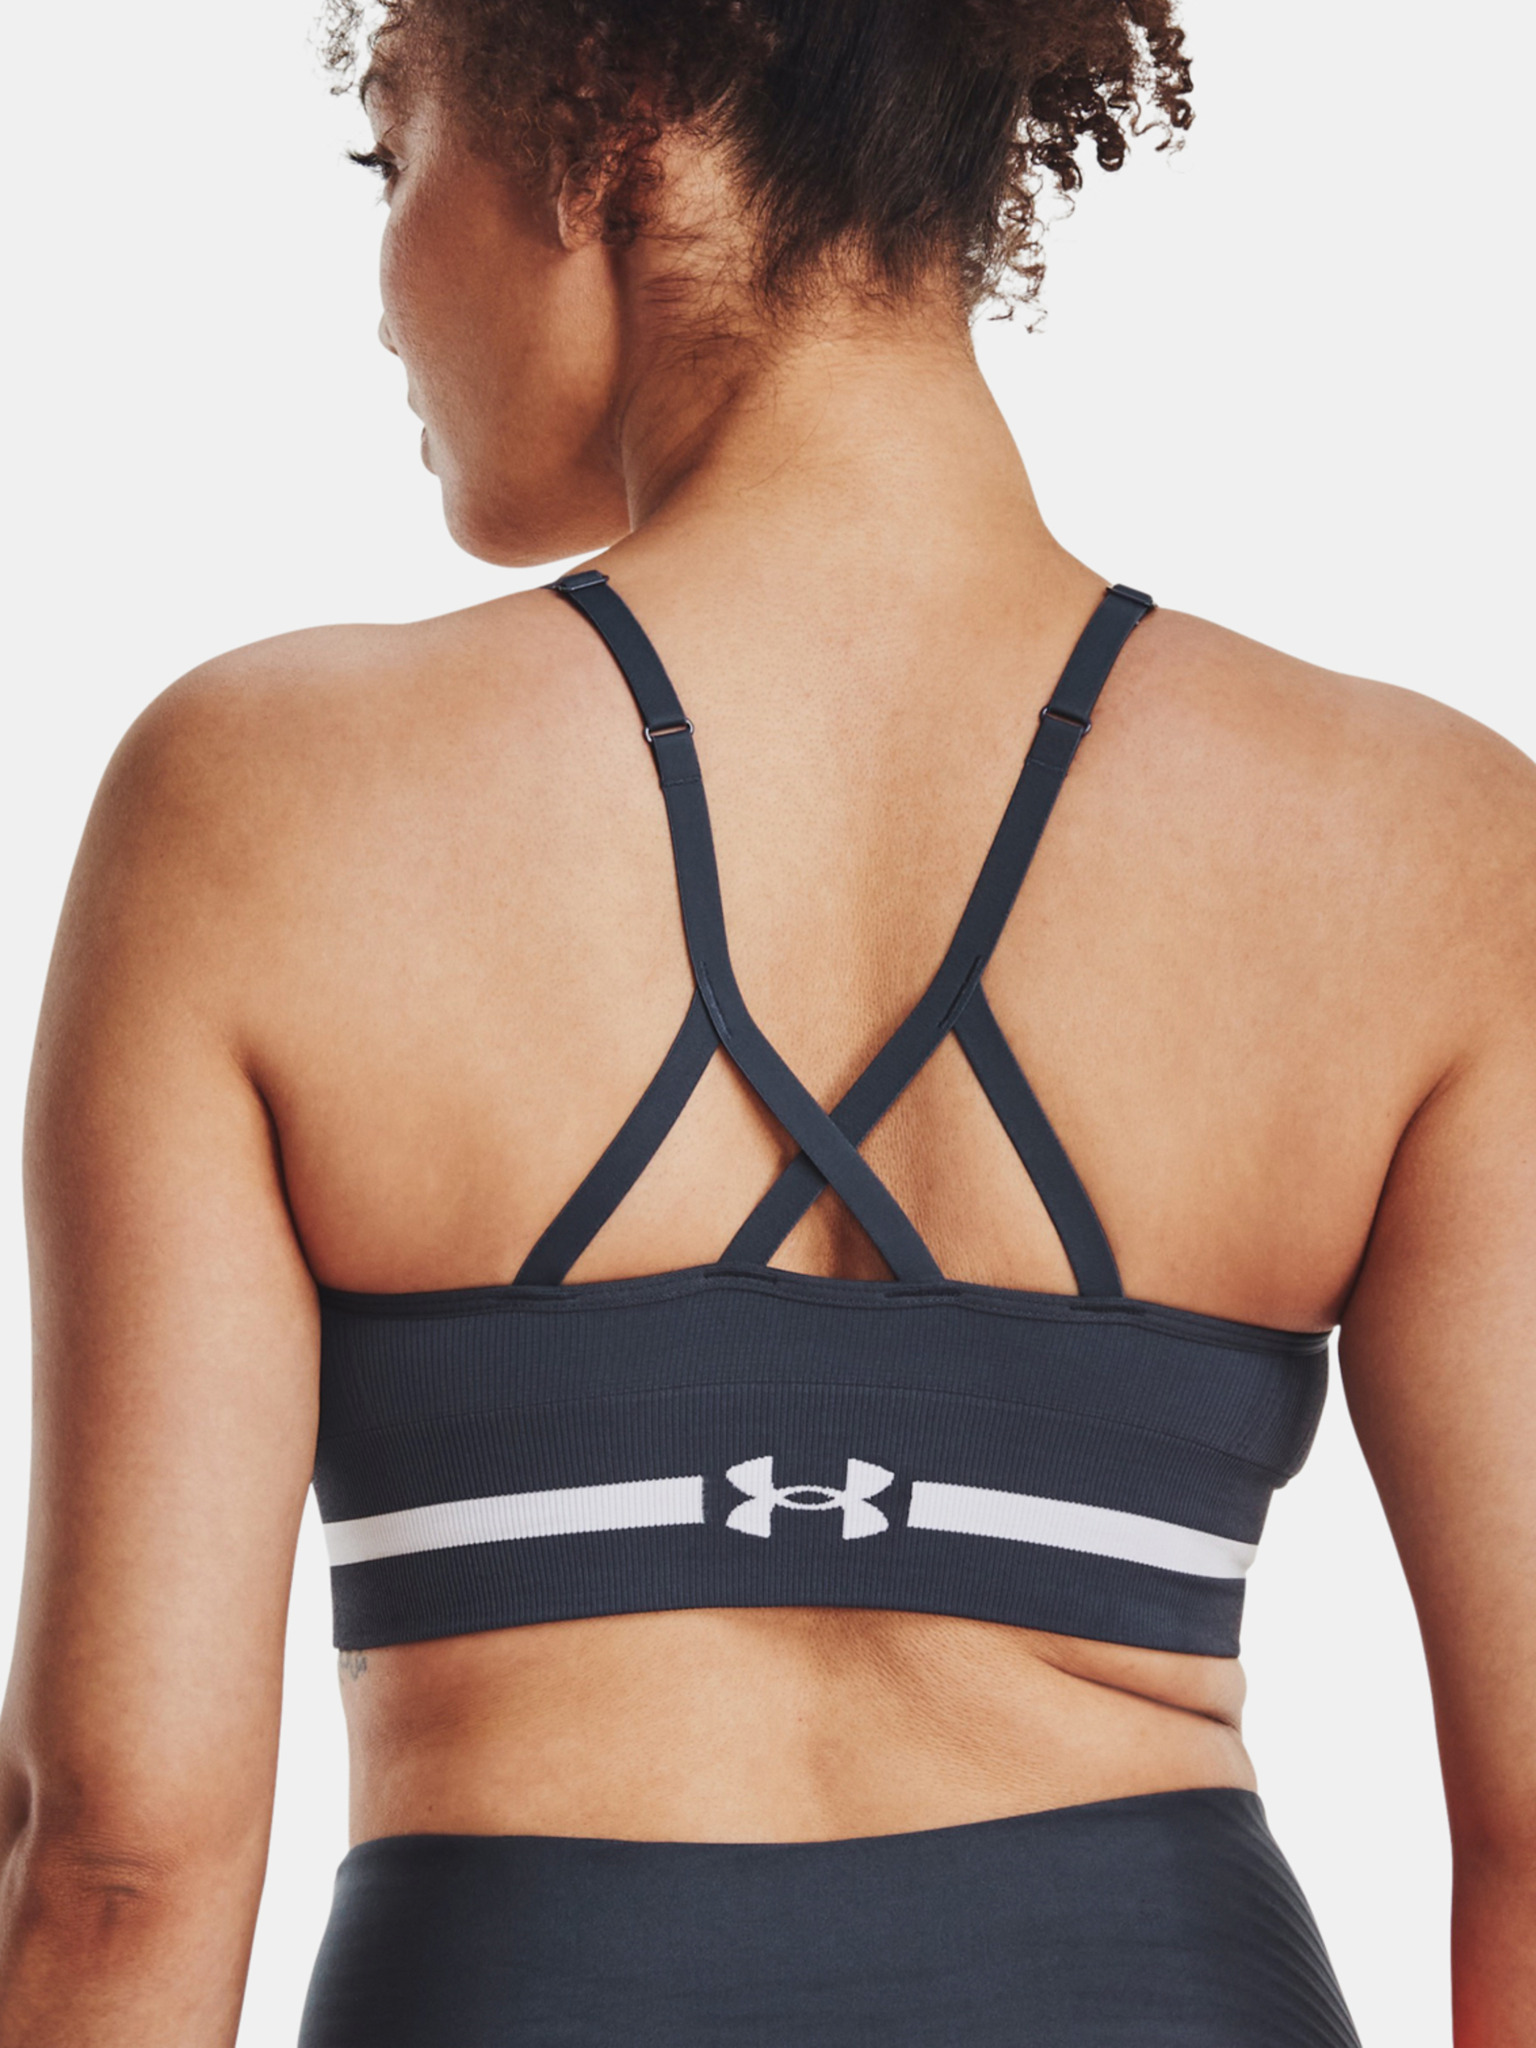 Under Armour Seamless Plunge Bra Afterglow 1248336-864 - Free